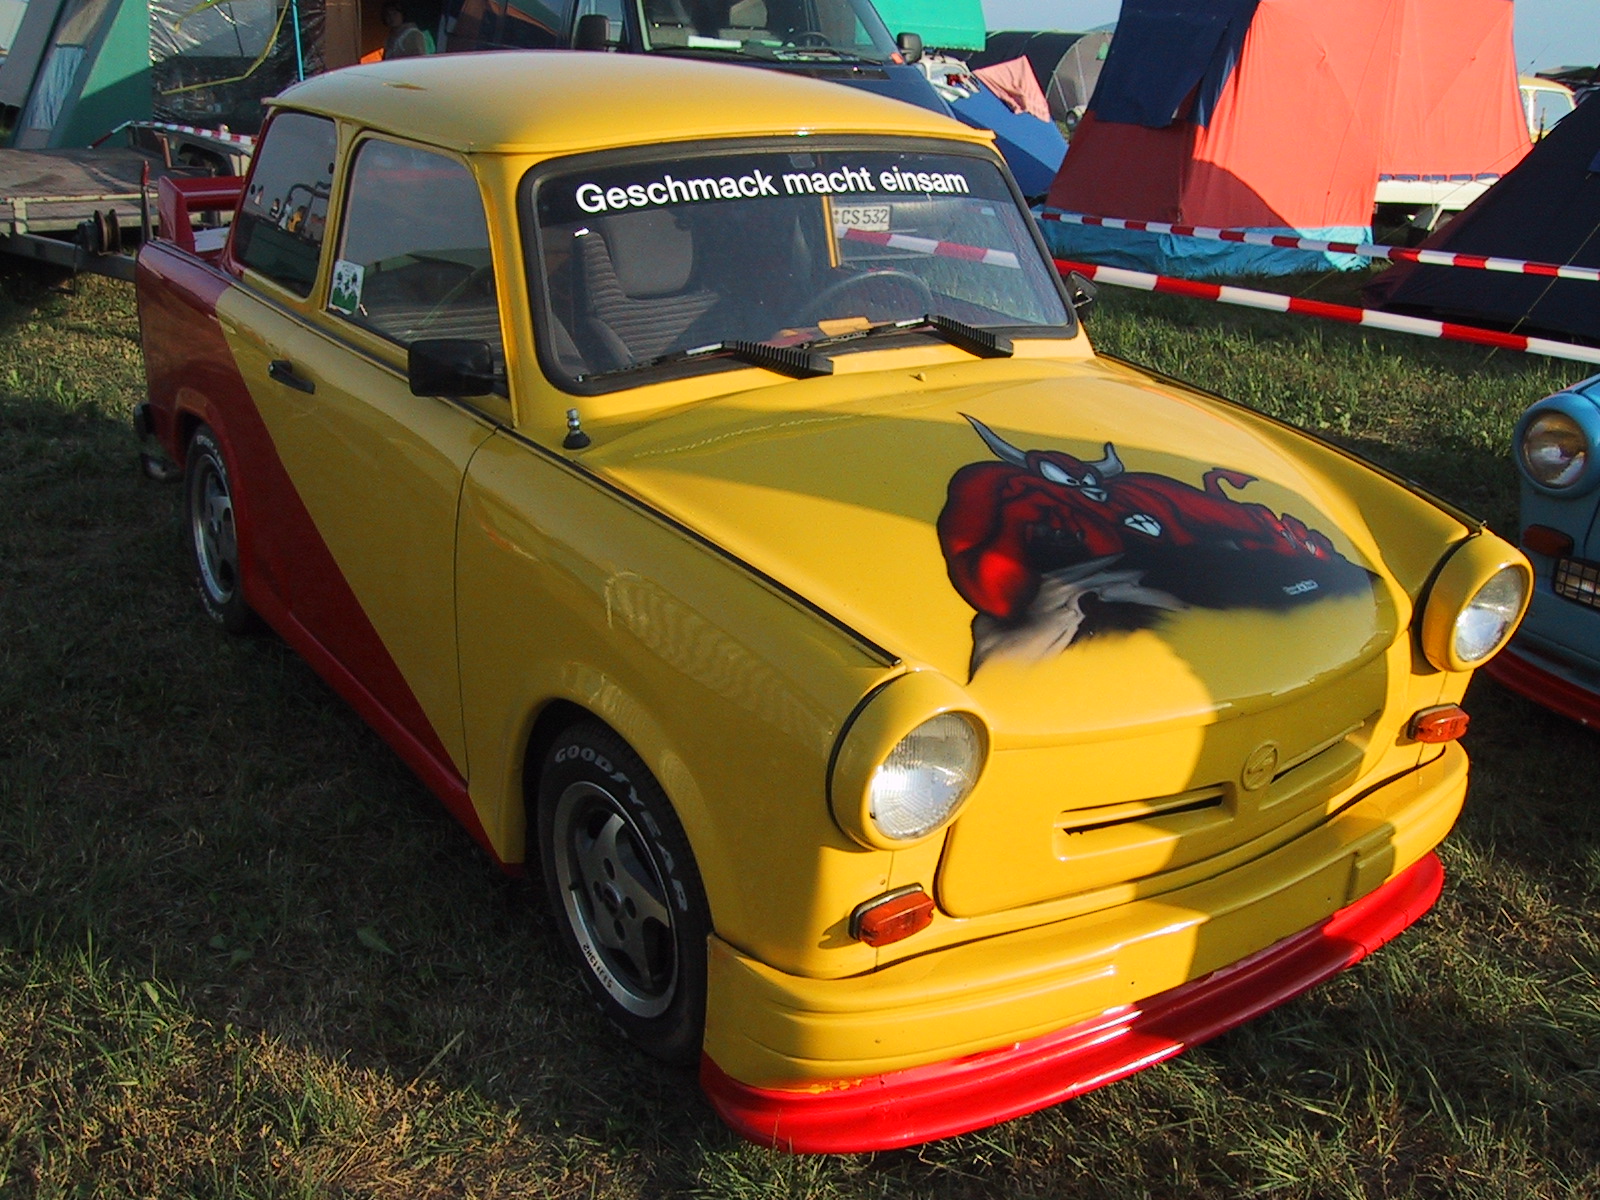 Trabant 601 Tuning Photo 04  Car in pictures - car photo gallery